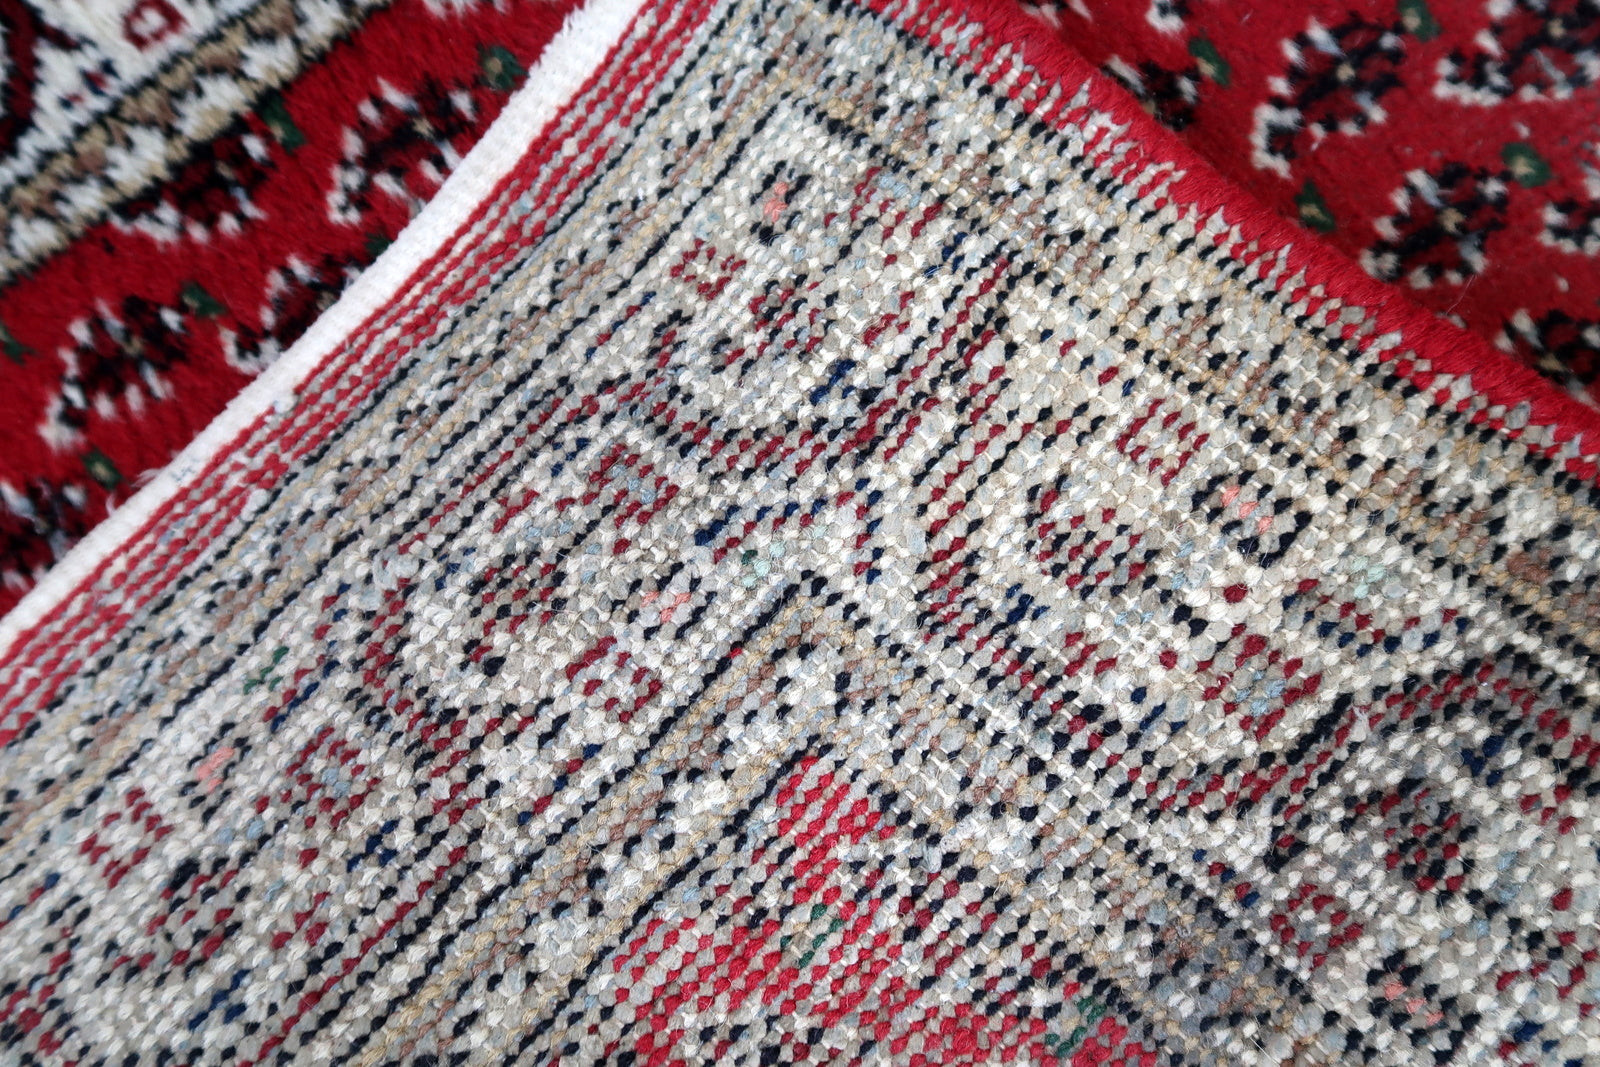 Handmade vintage Indian Seraband rug in red color and all-over design. The rug has been made in the end of 20th century. It is in original condition, has some low pile.